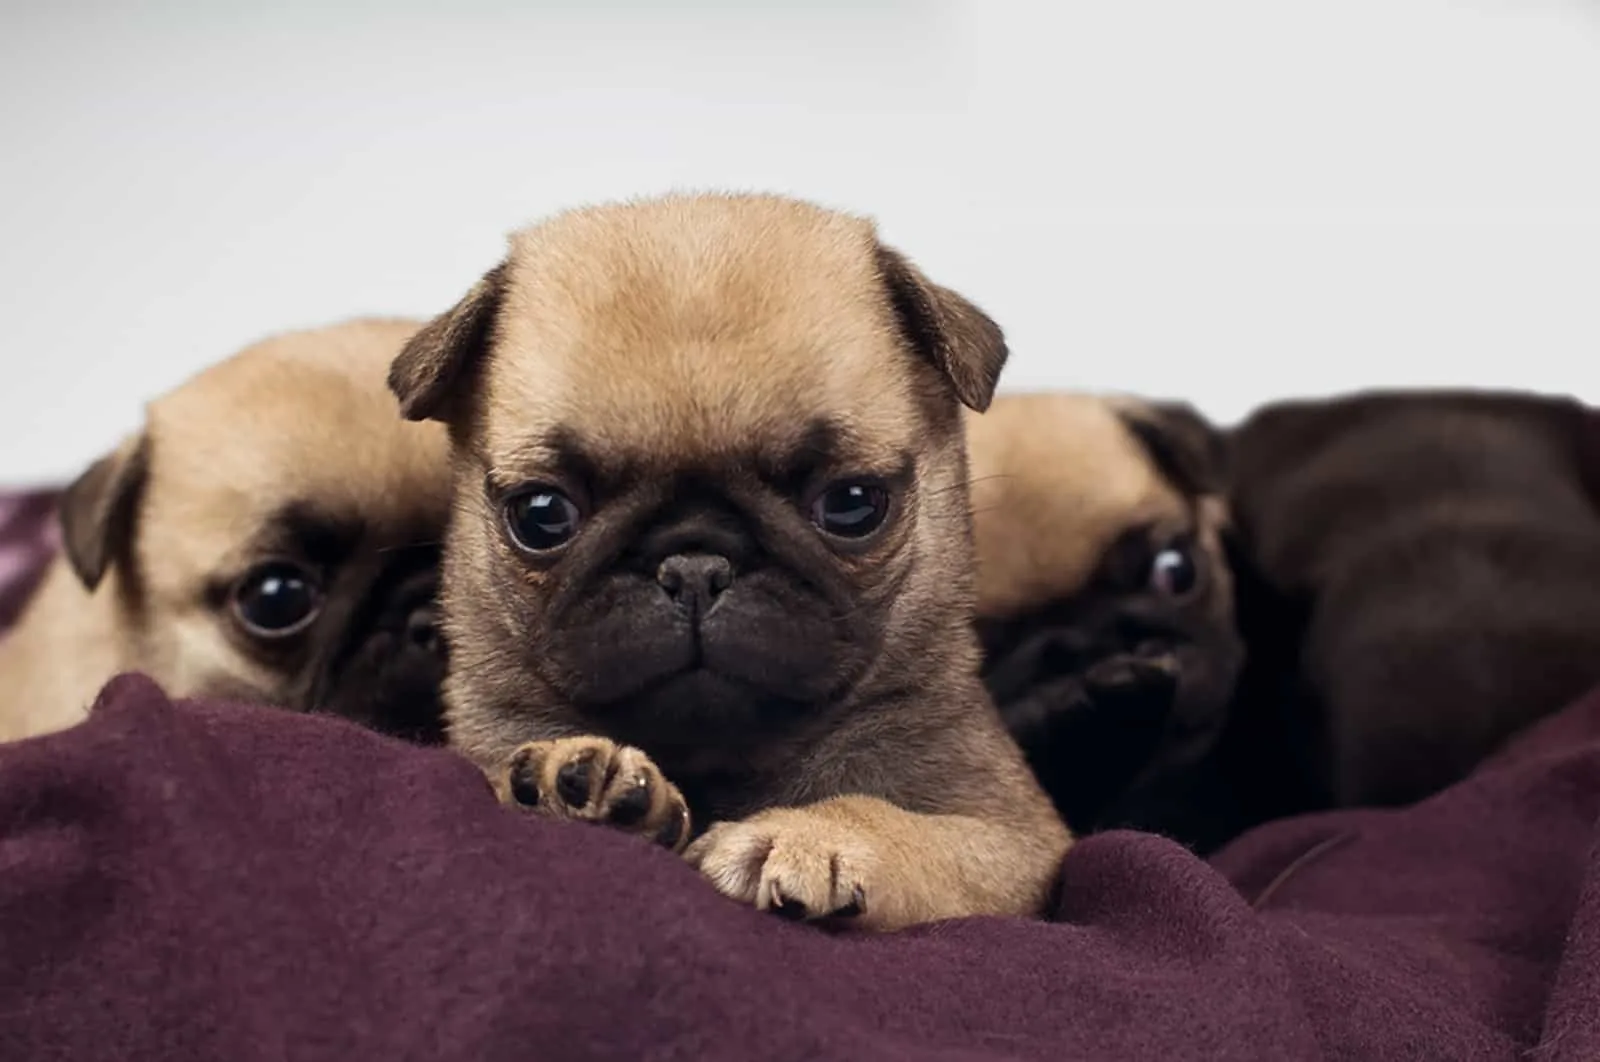 pug puppies lying in the bed